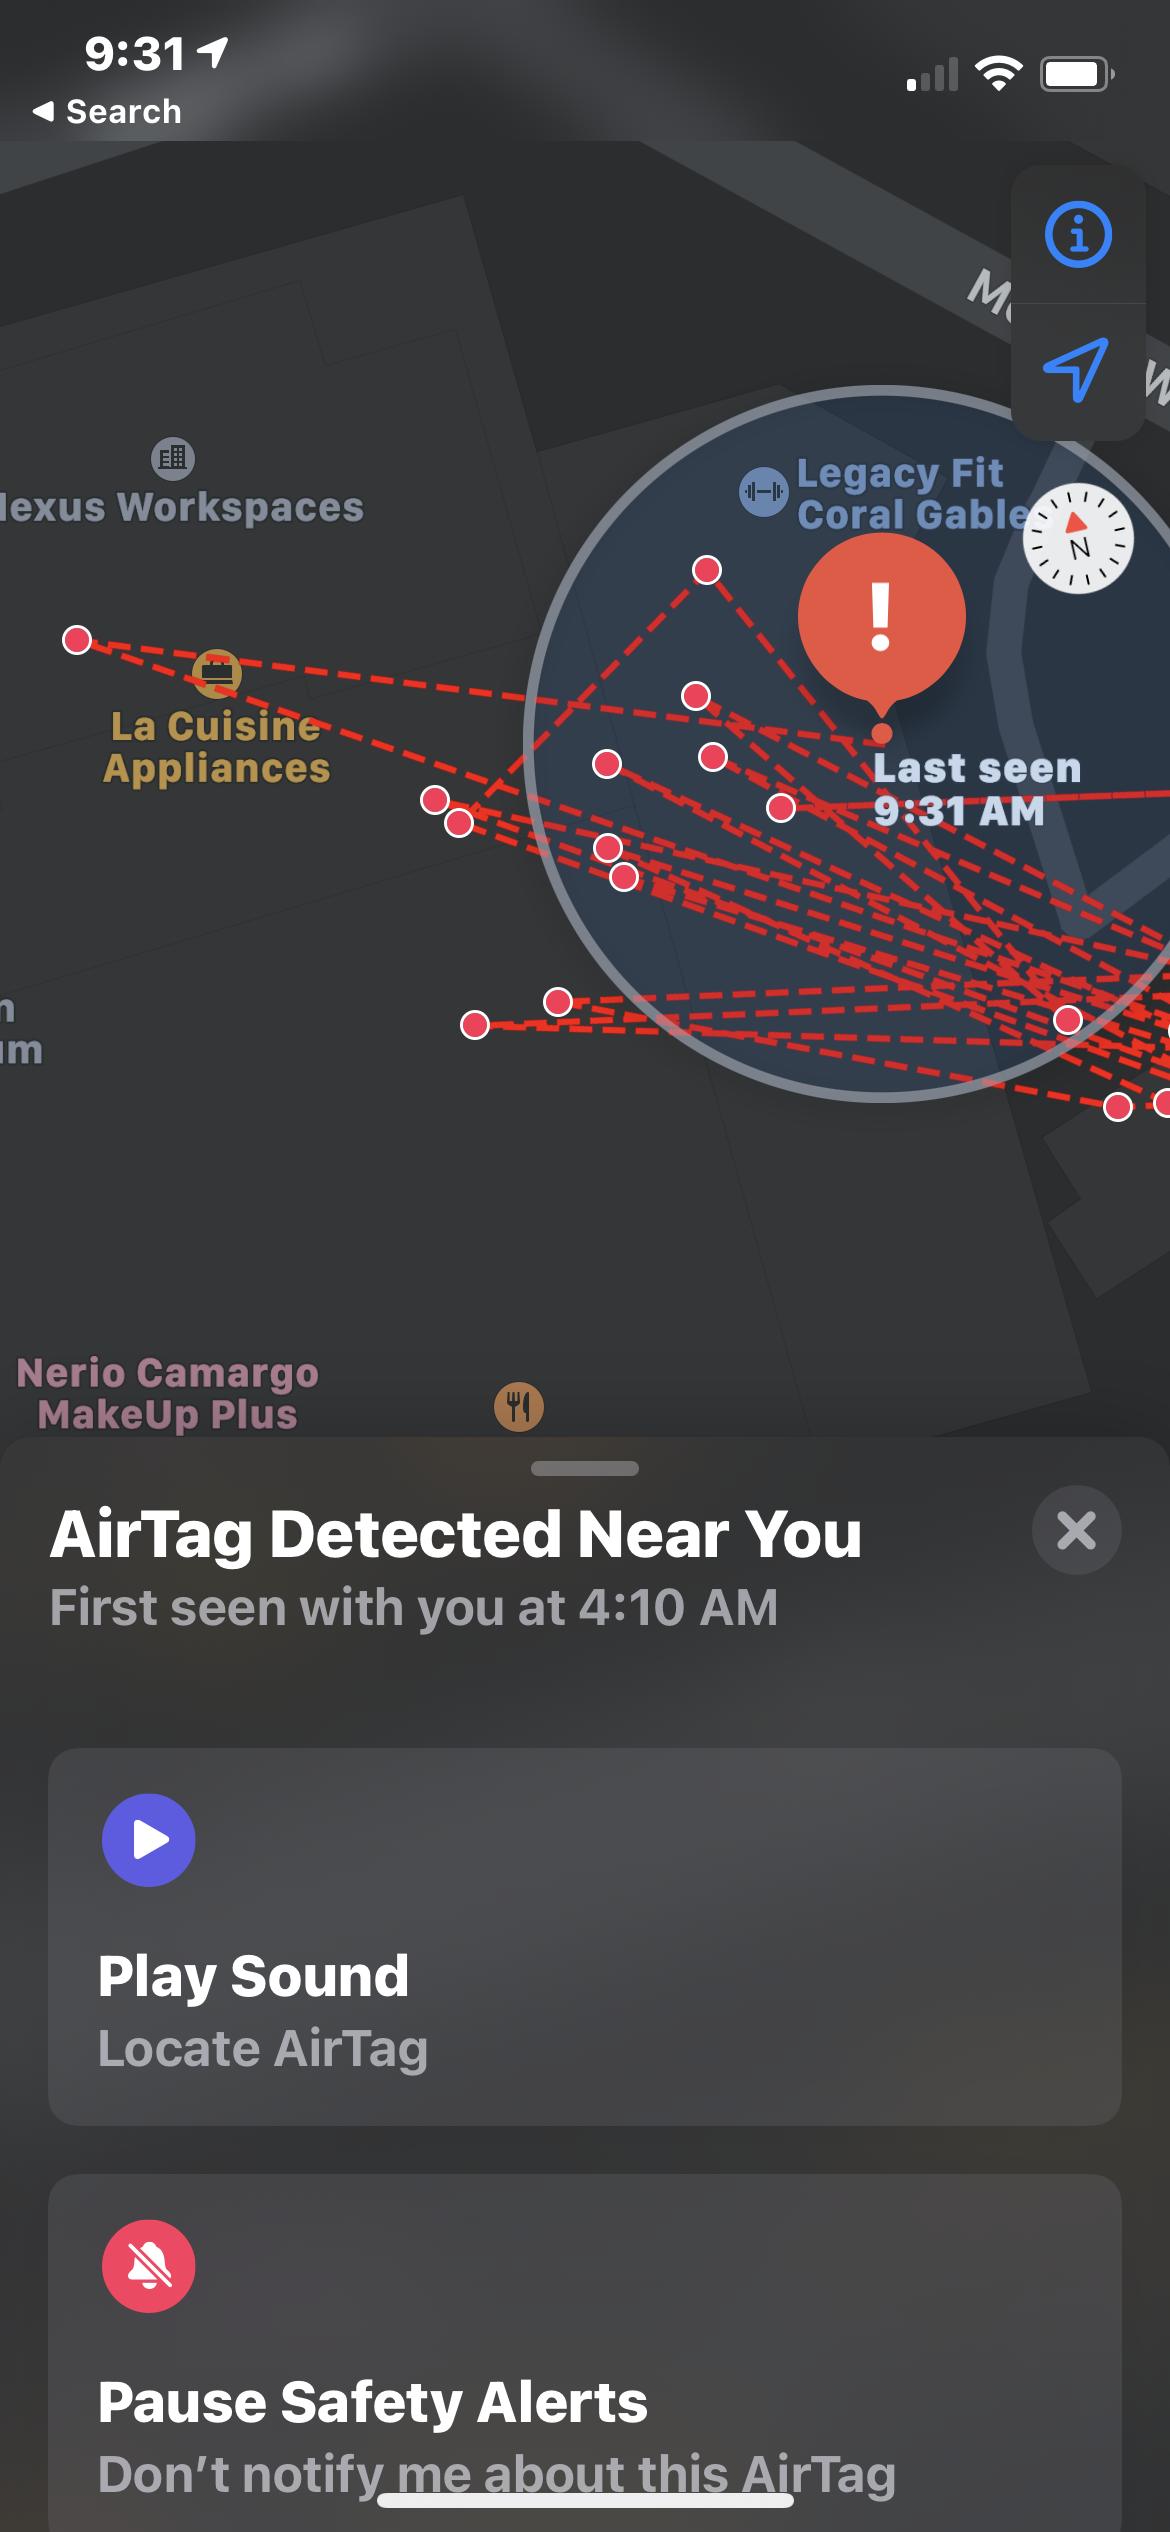 Your Android Phone Will Soon Be Able to Alert You to an Unknown AirTag